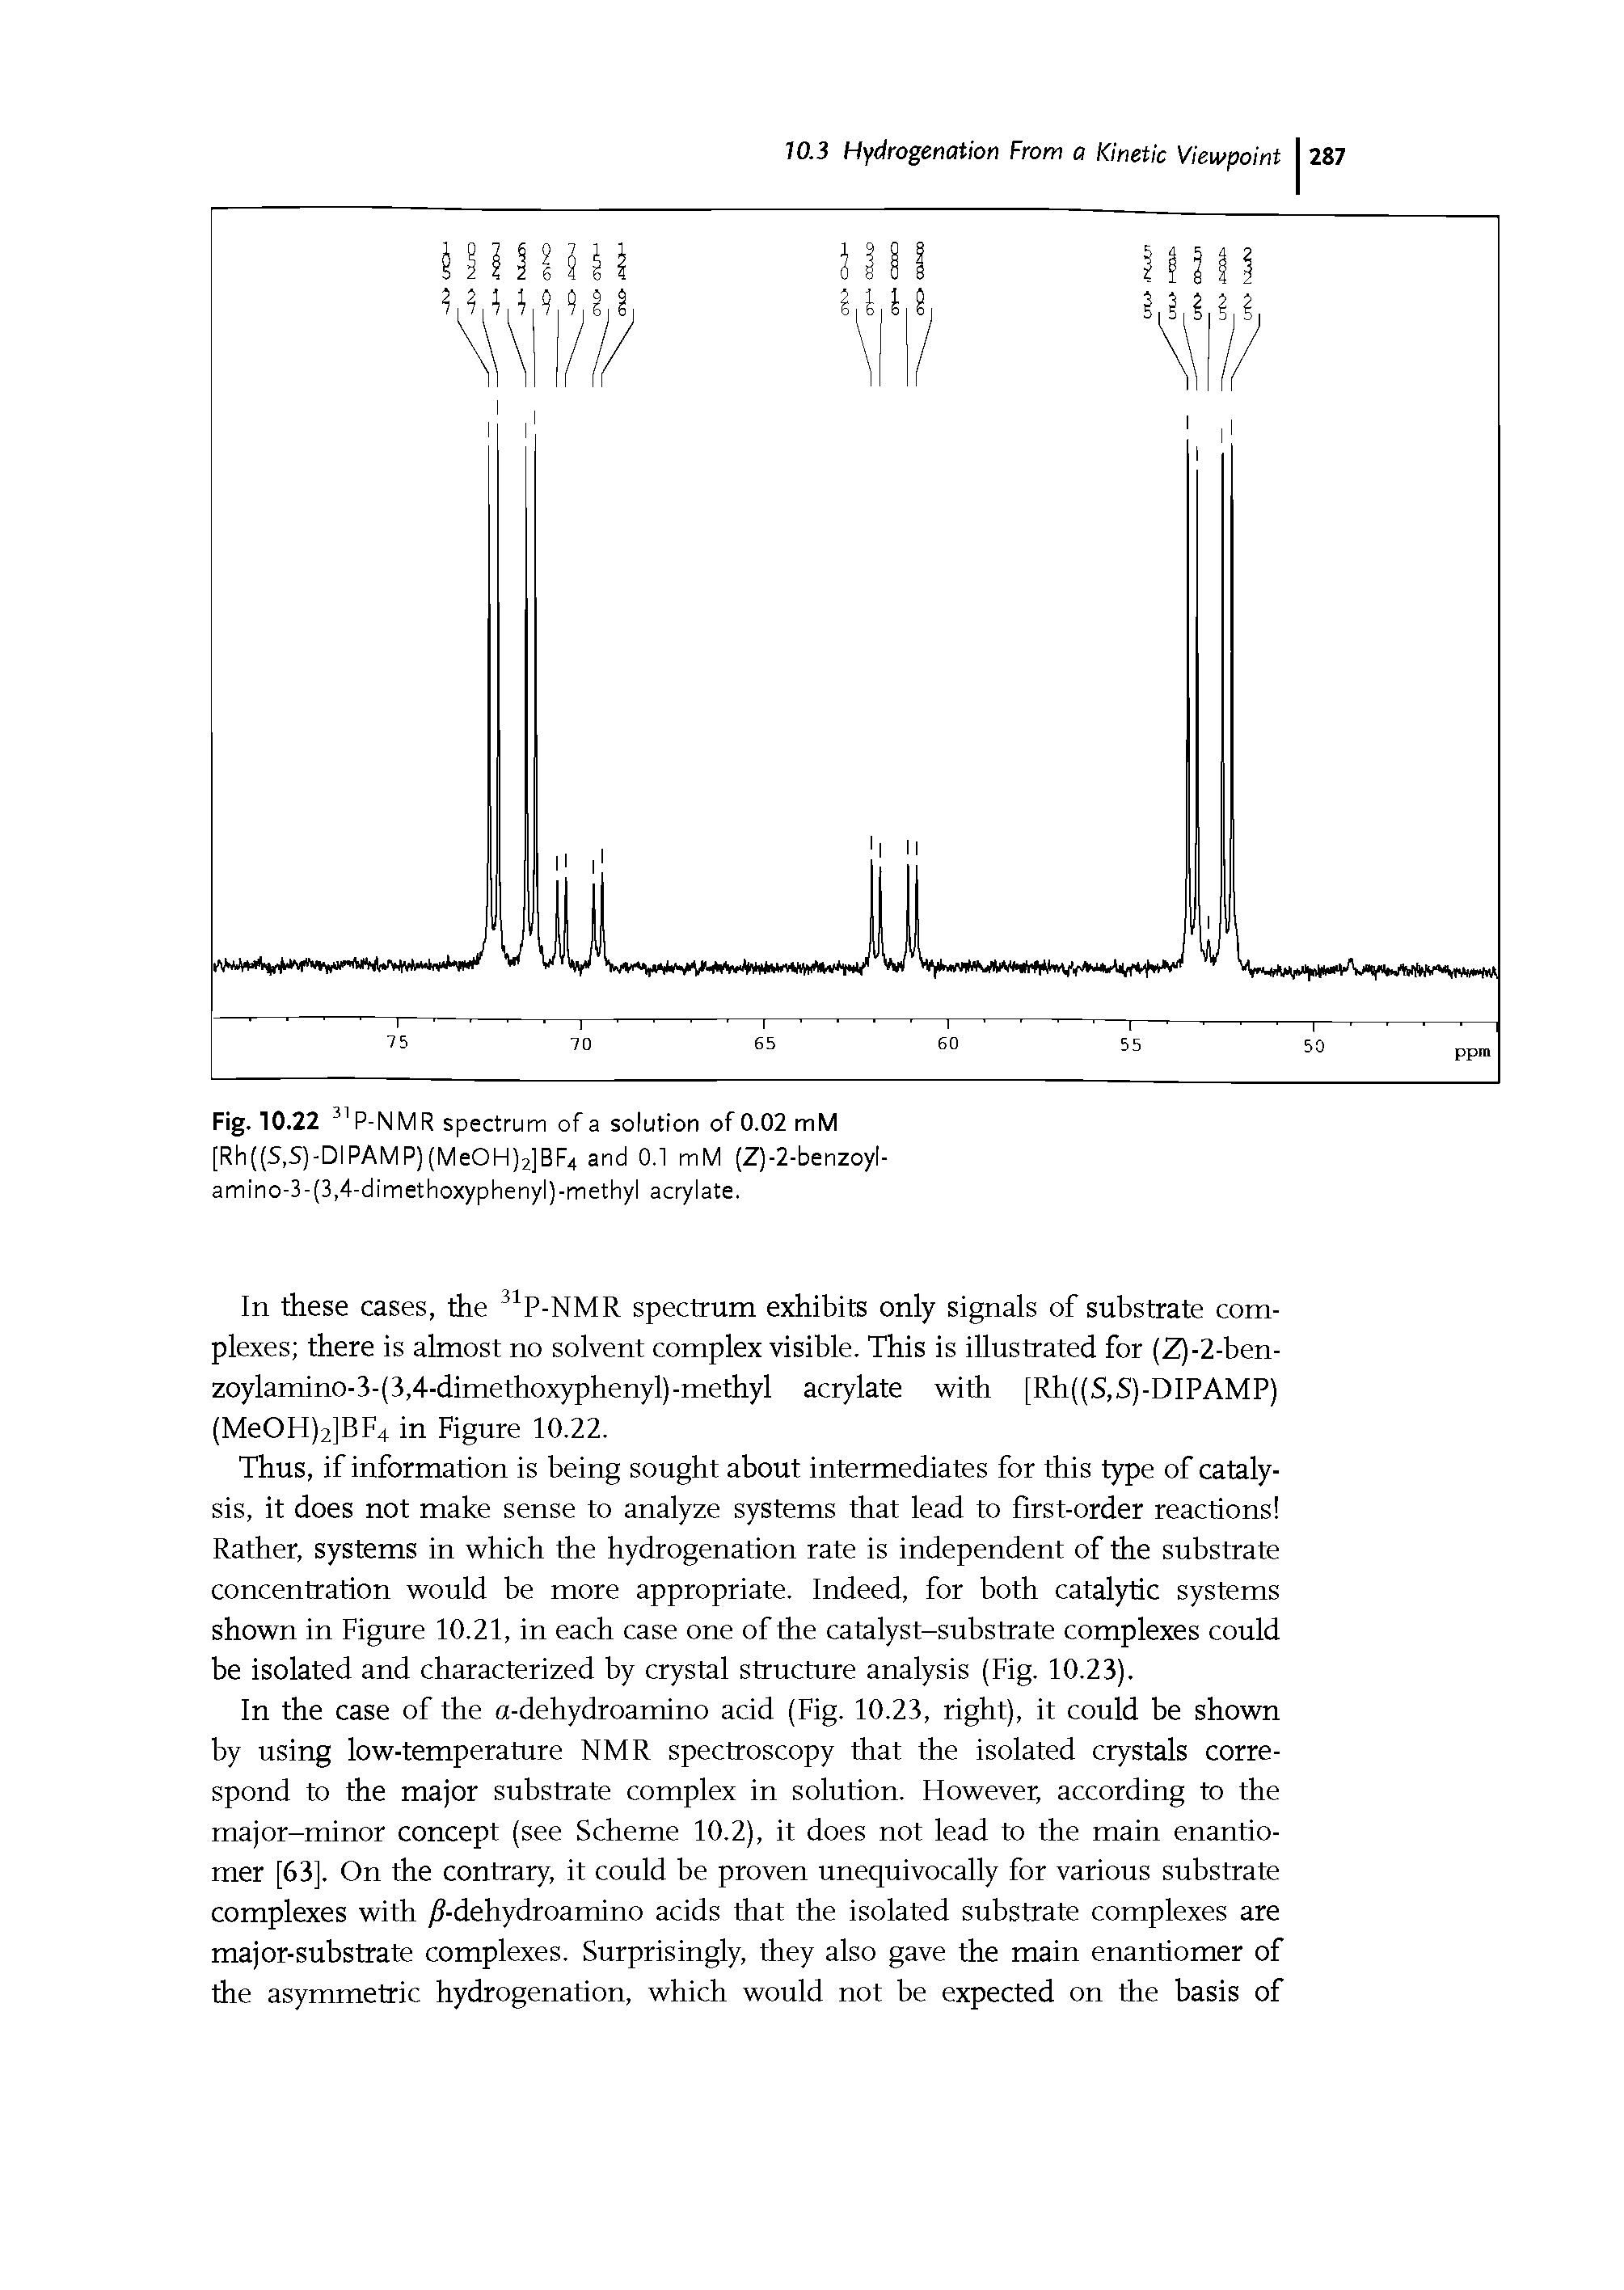 Fig. 10.22 31P-NMR spectrum of a solution of 0.02 mM [Rh((S,S)-DIPAMP)(MeOH)2]BF4 and 0.1 mM (Z)-2-benzoyl-amino-3-(3,4-dimethoxyphenyl)-methyl acrylate.